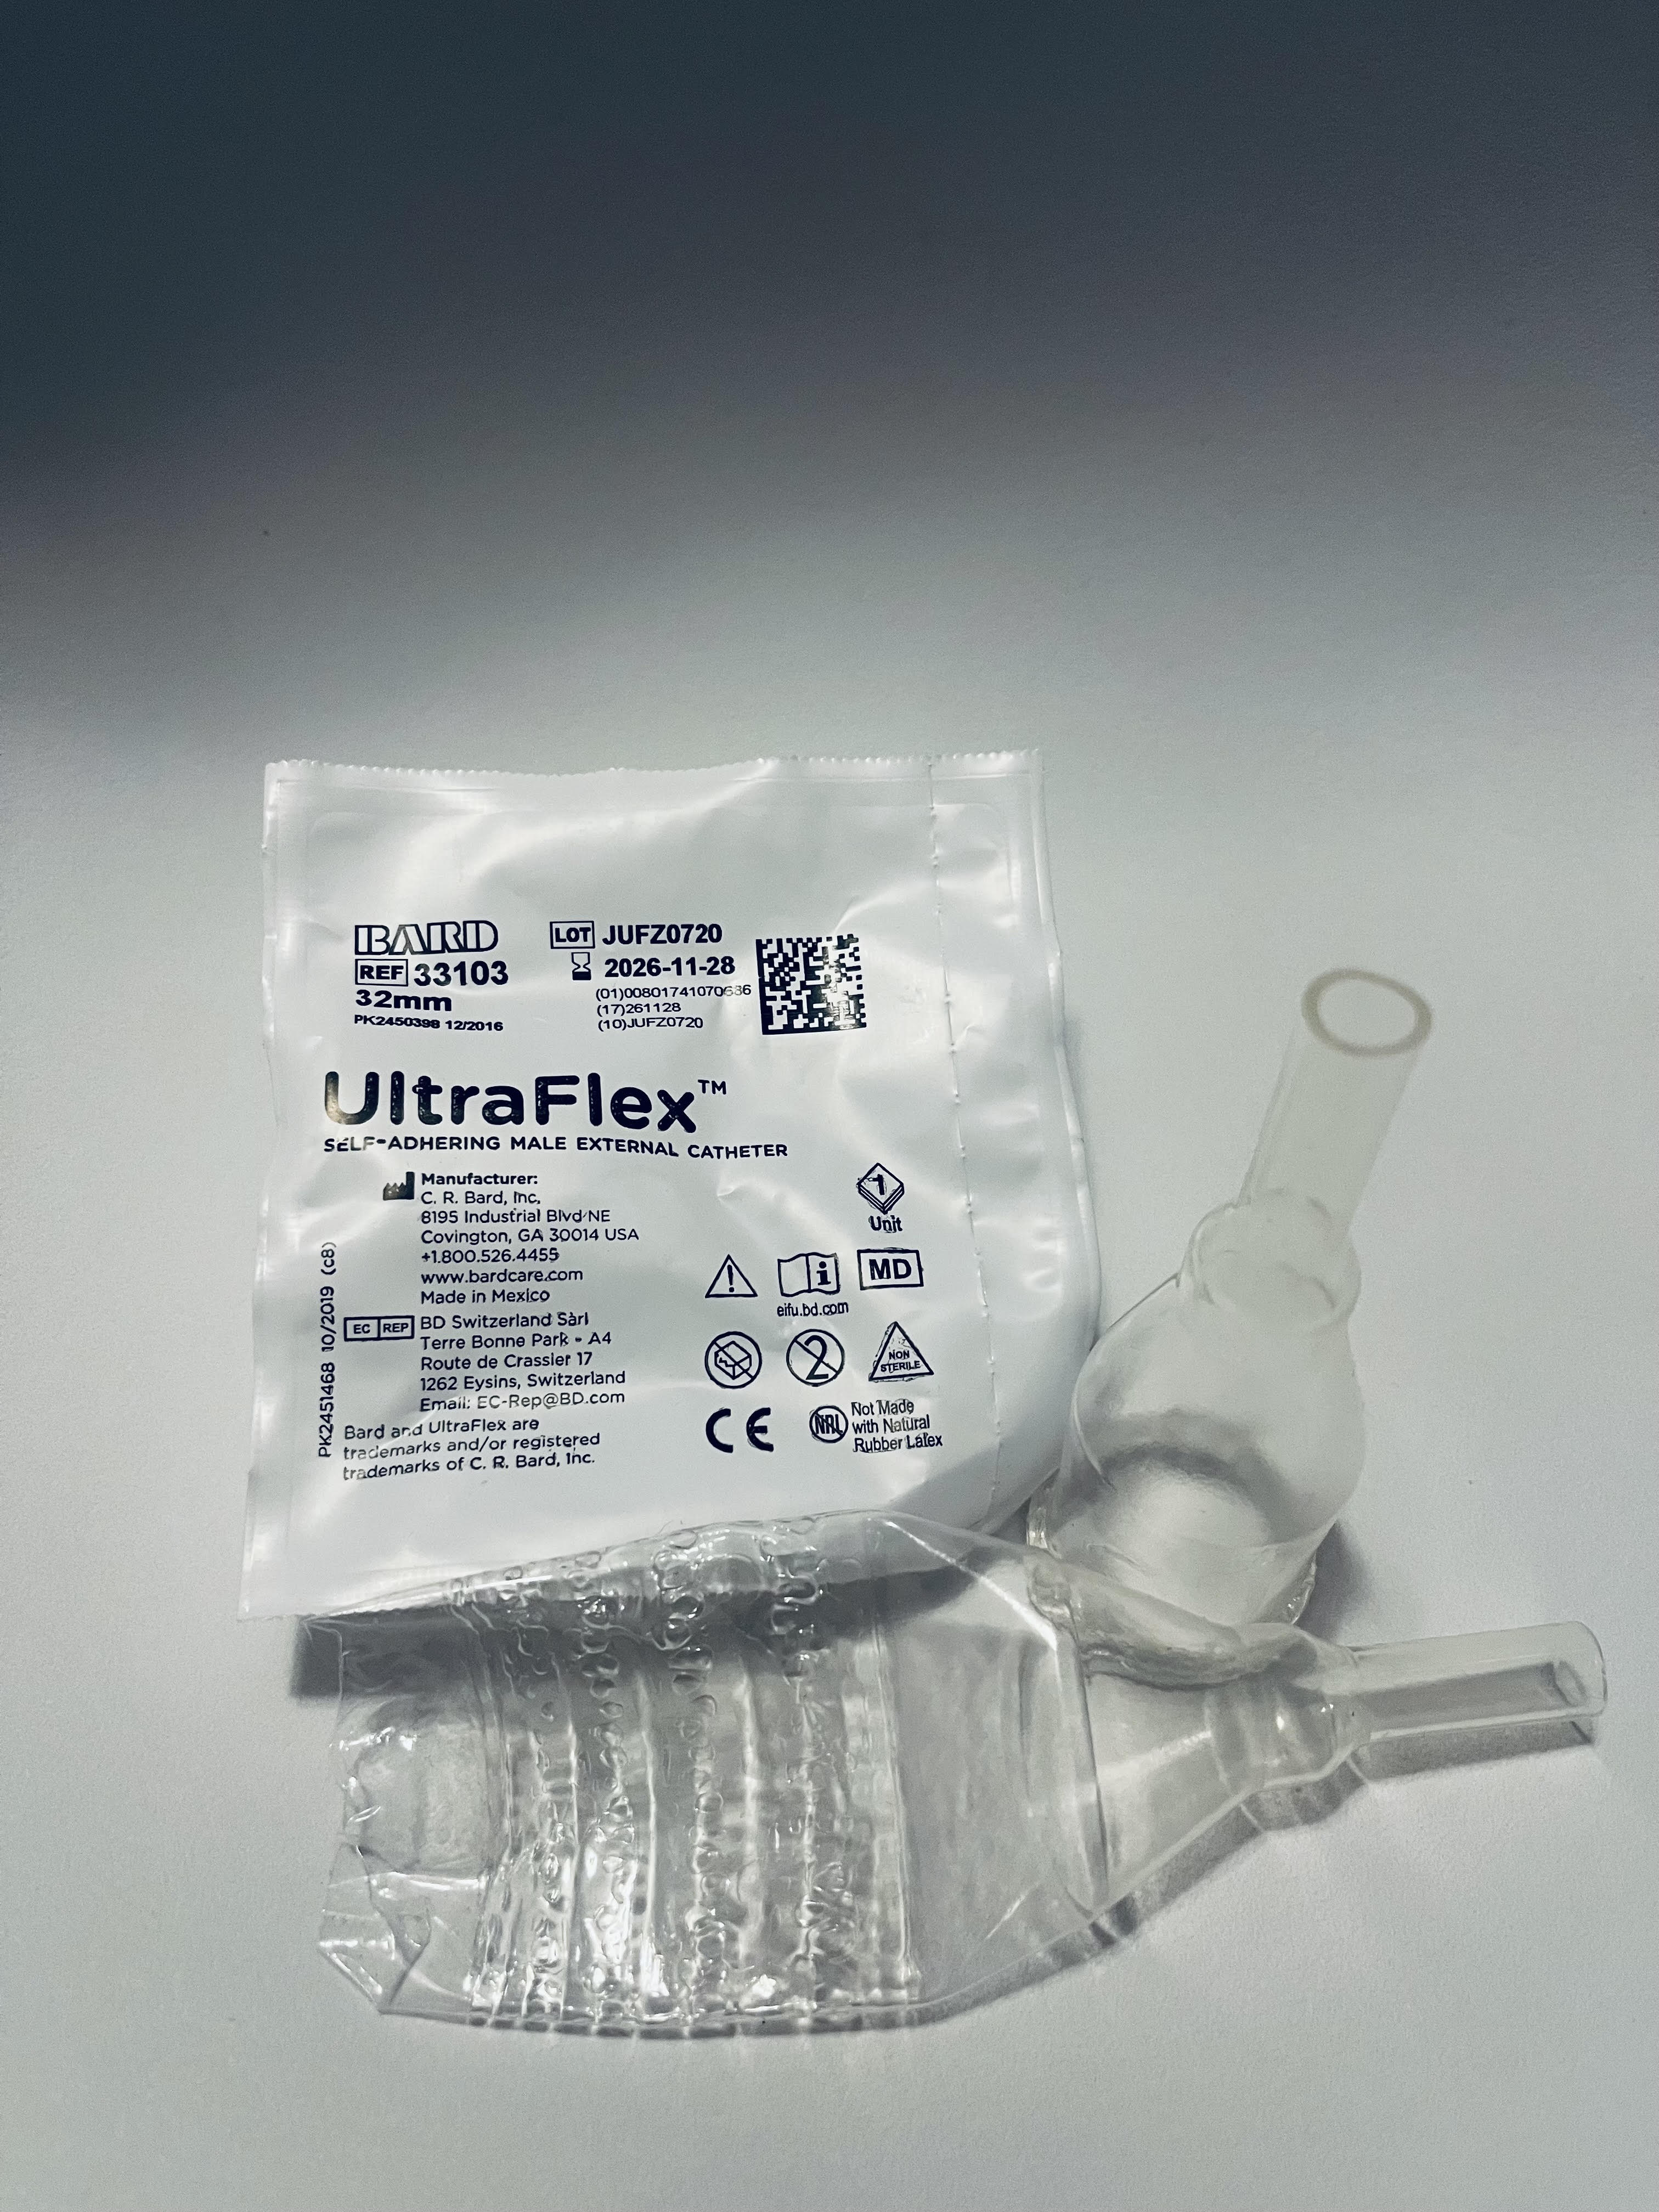 Urinary Kits 1-Week Kits 1-Week Urinary Incontinence  Kit (32mm UltraFlex) by Veteran Medical Supplies online store selling catheters, drainage bags, urinary kits centrally located in Kansas City Missouri shipping to the entire United States